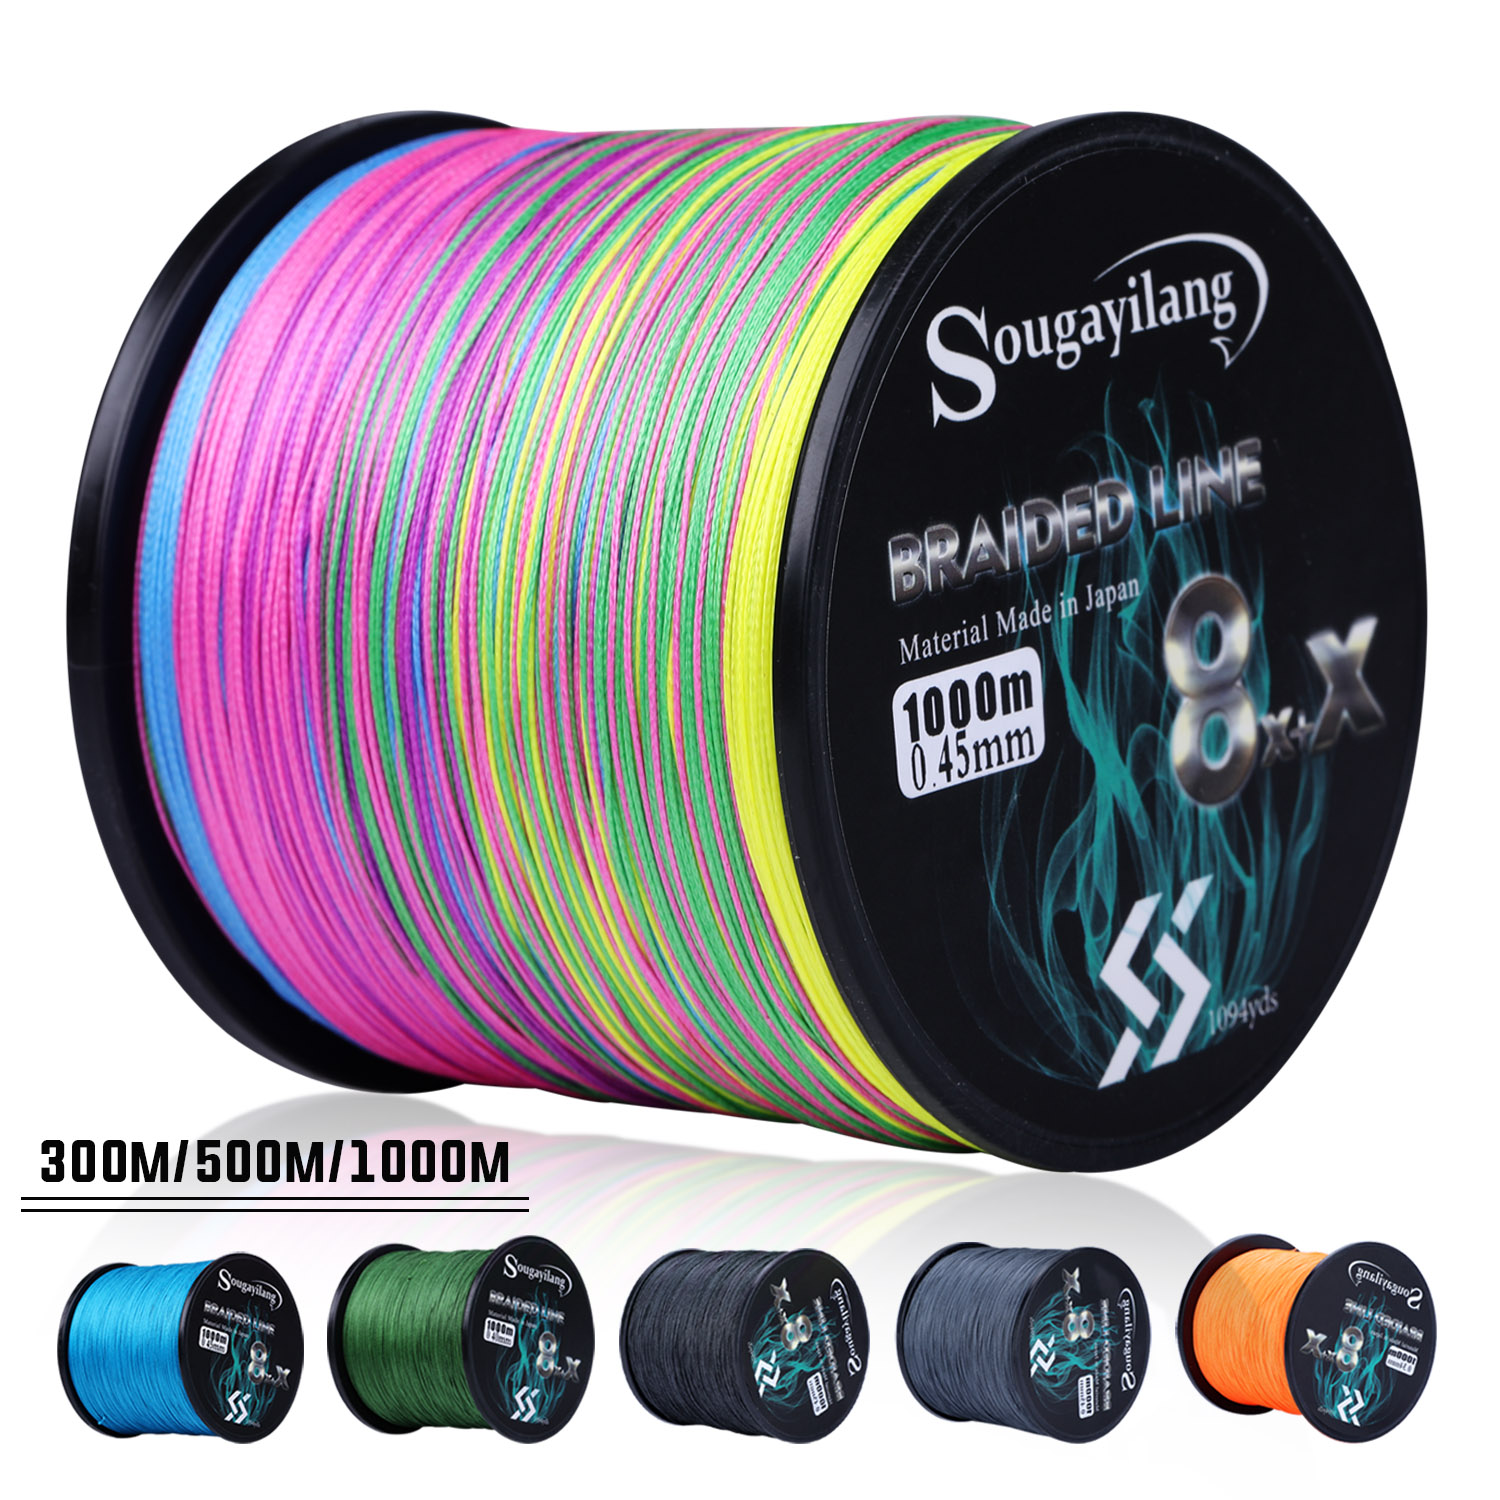 Details about   Strong Fishing Line 4/9 Strands Multifilament Anti-Bite Braided Tool 300m 500m 